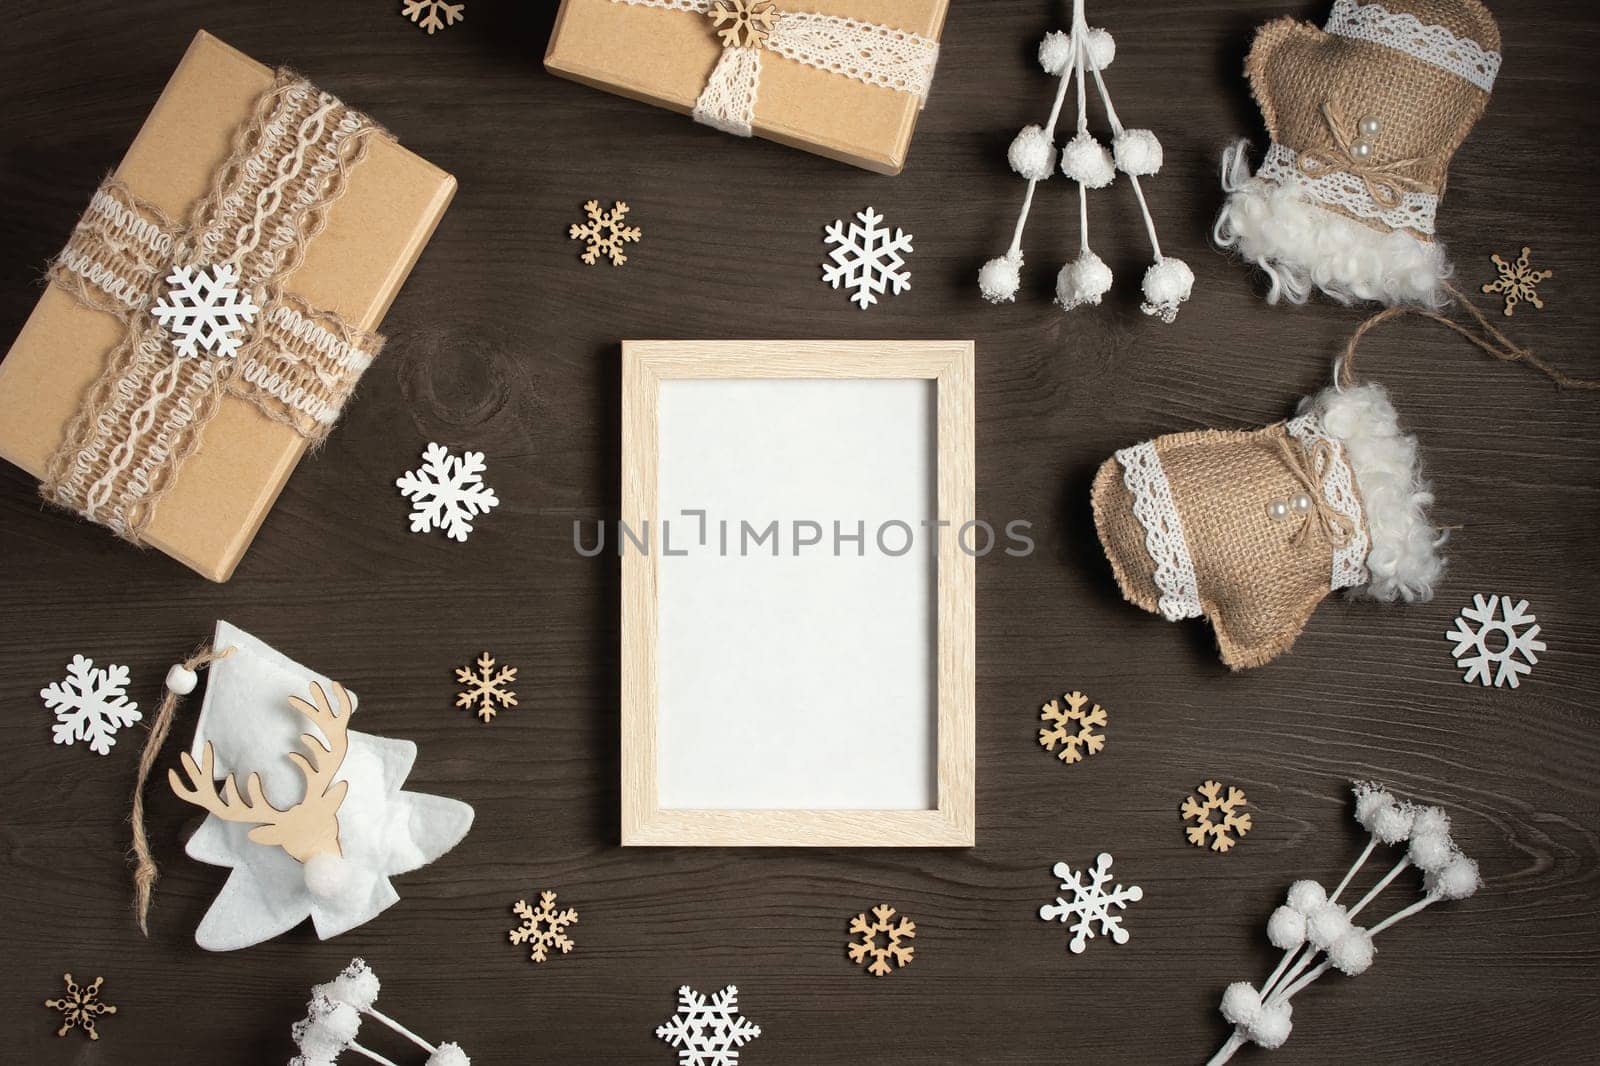 An empty frame on a wooden table surrounded by Christmas gifts and ornaments made of natural materials. A mockup for greeting cards and advertisements.